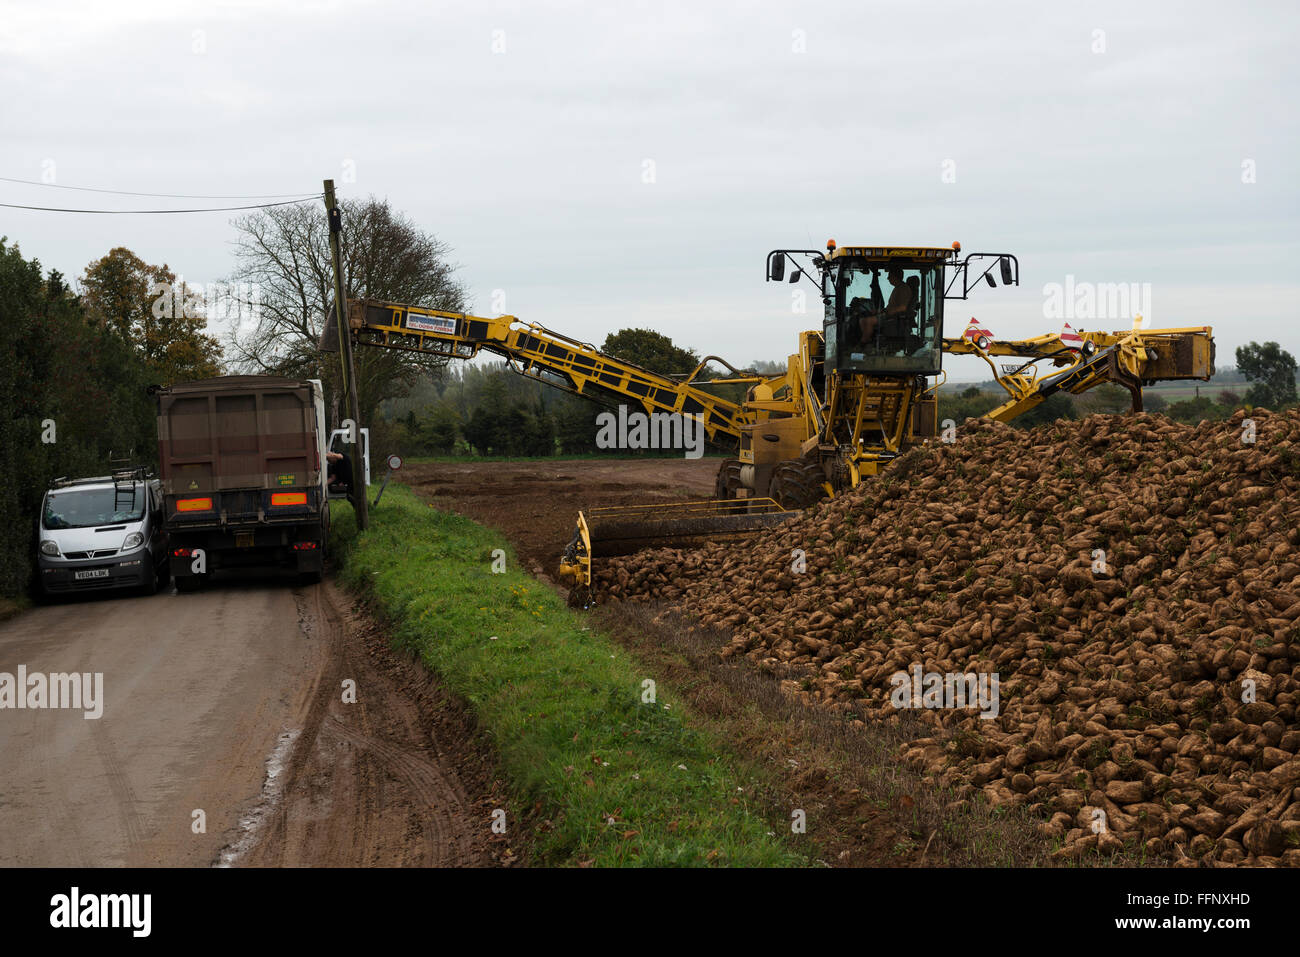 Sugar beet being loaded onto a lorry parked on a narrow country road, Hollesley, Suffolk, UK. Stock Photo